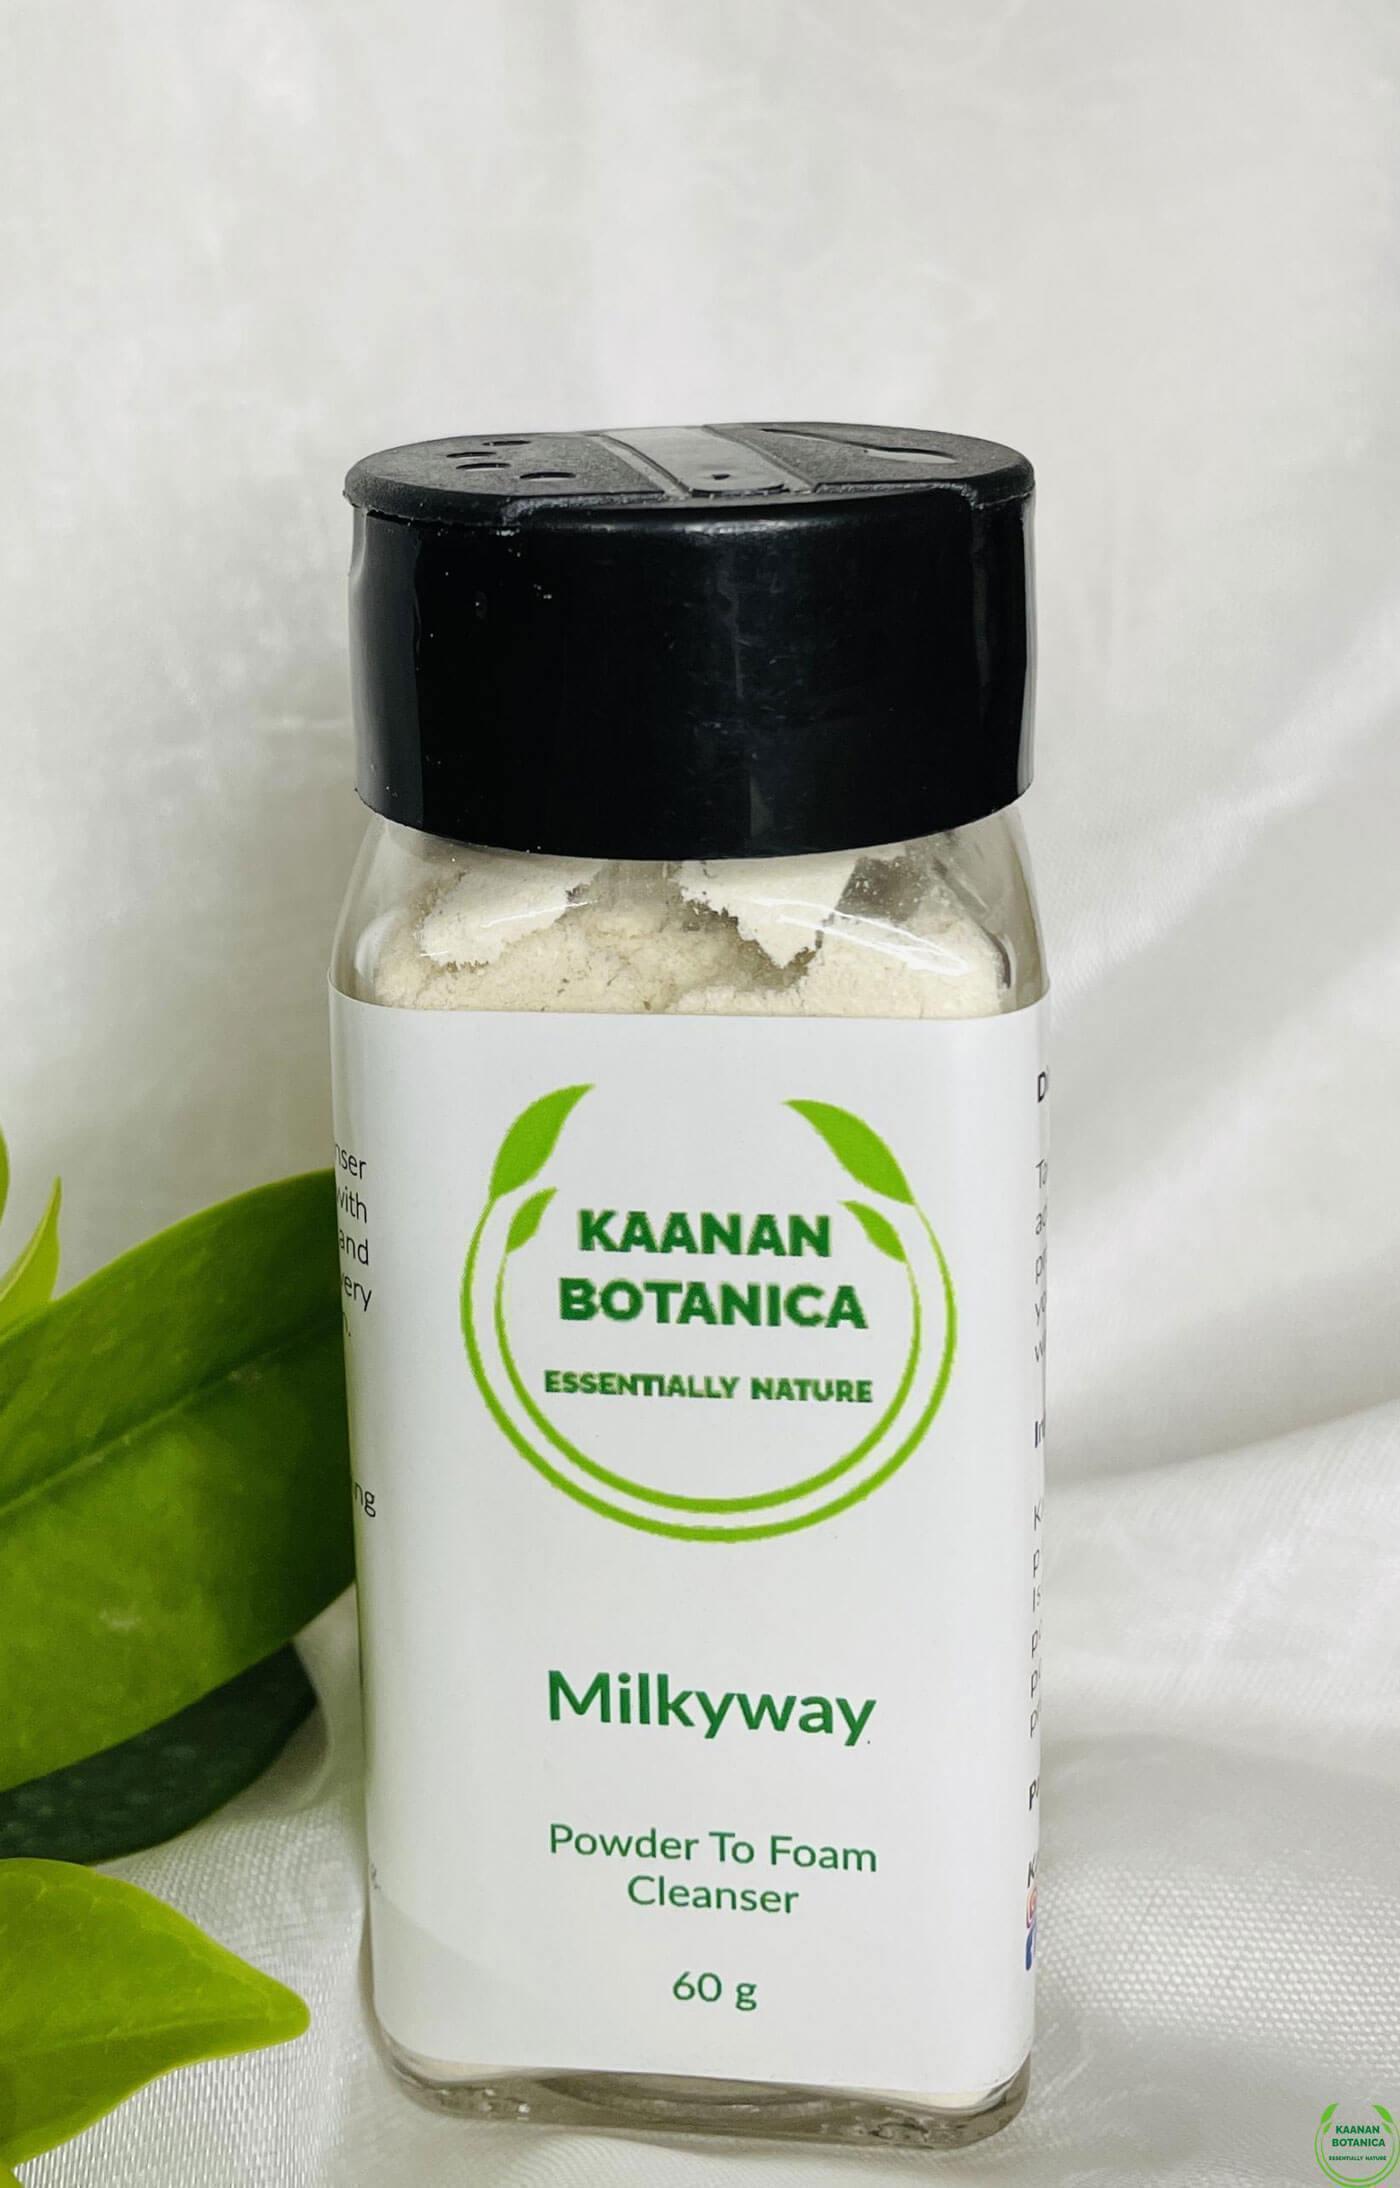 Milkway Powder To Foam Cleanser - Best Cleansers For Face